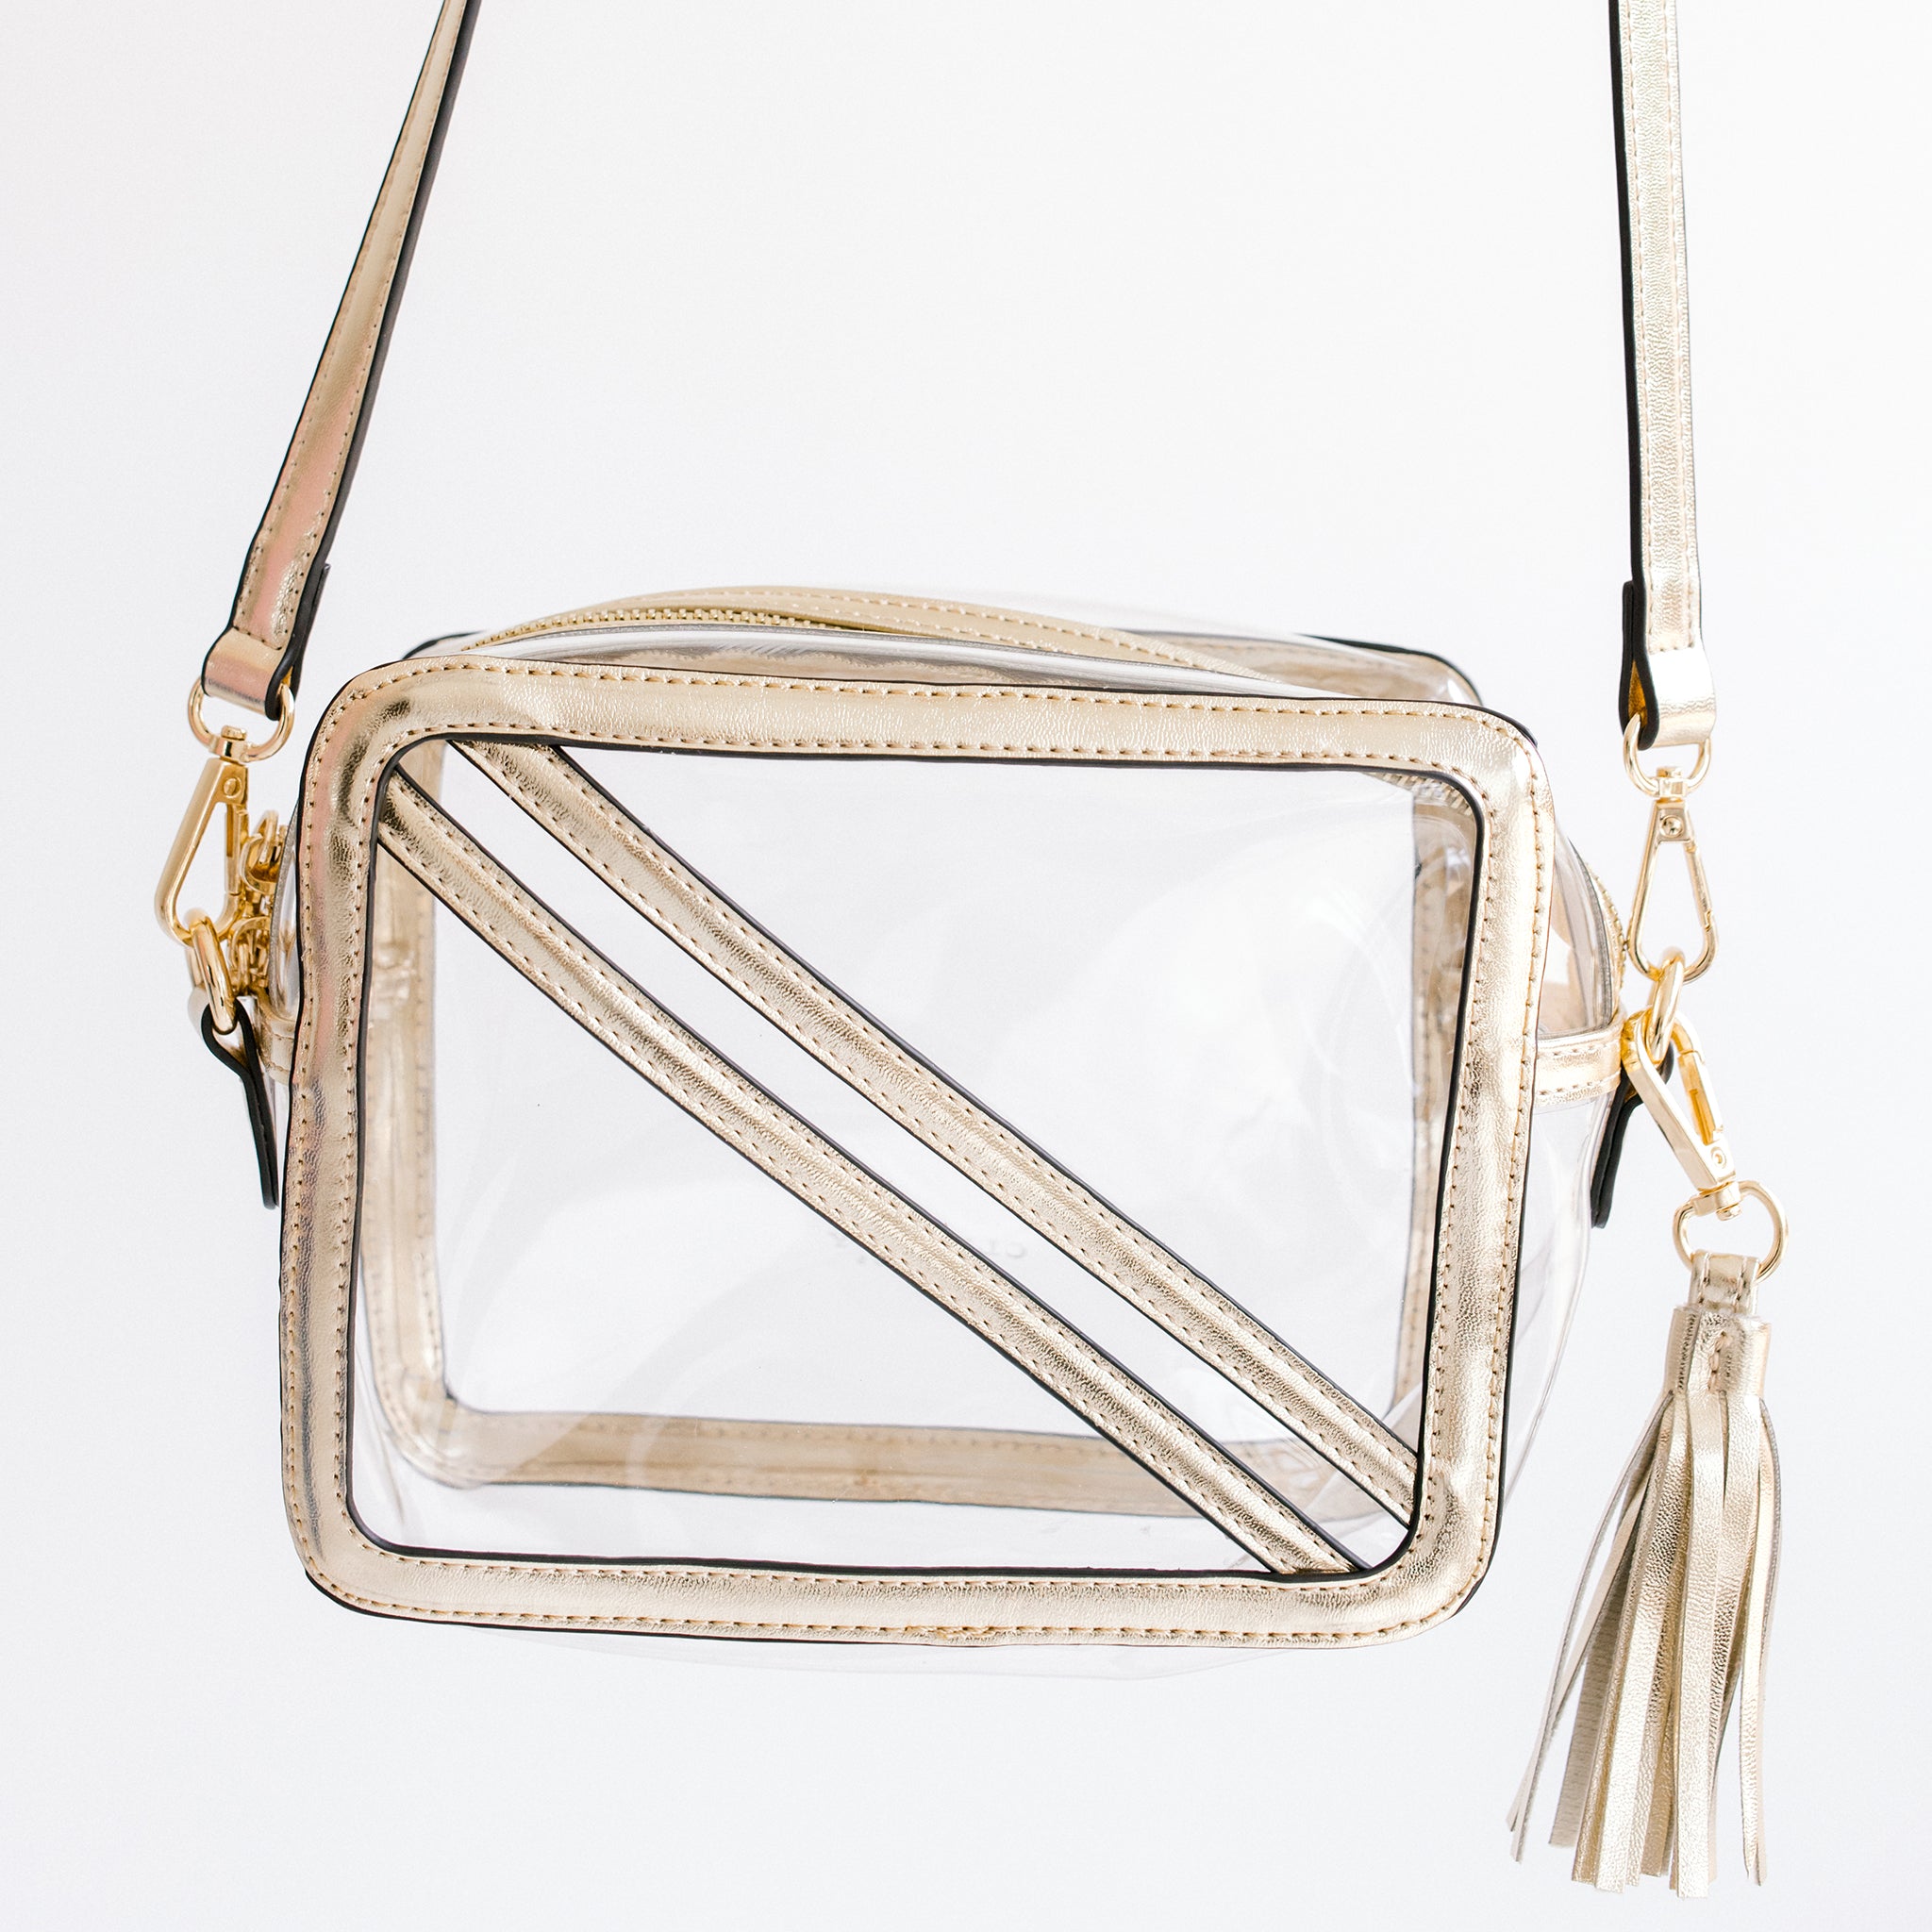 Clearly Iconic Silver and Clear Vinyl Crossbody Bag